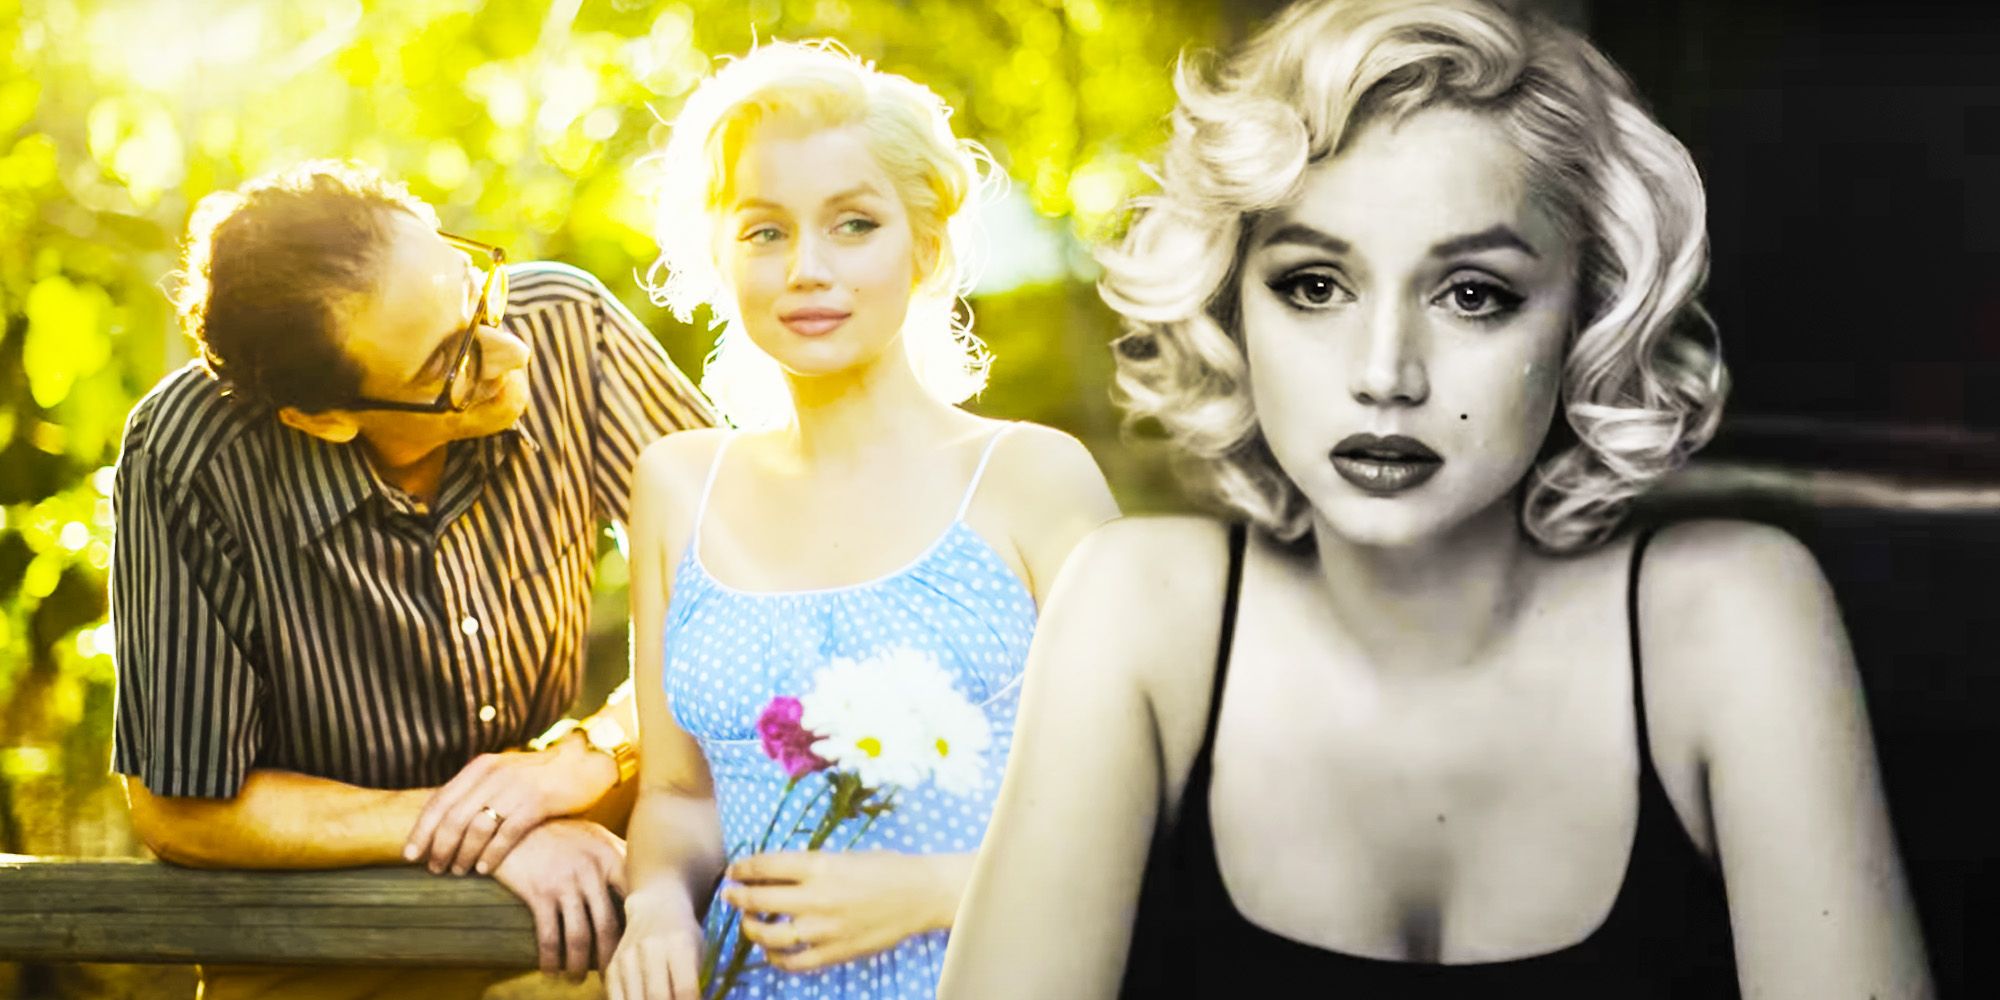 Blonde': Watch first teaser for Netflix's controversial Marilyn Monroe movie